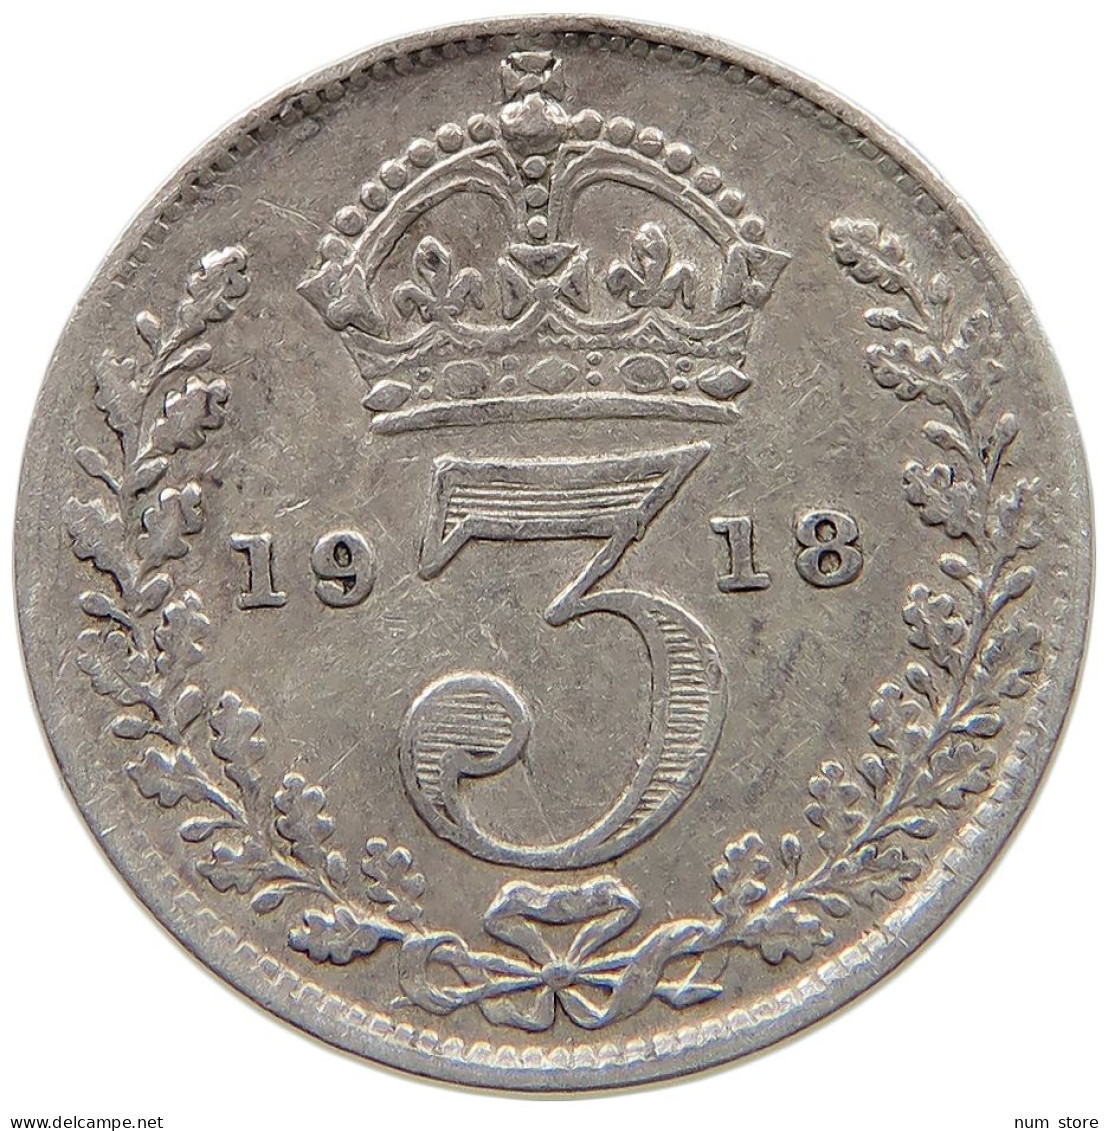 GREAT BRITAIN THREEPENCE 1918 #s059 0593 - F. 3 Pence